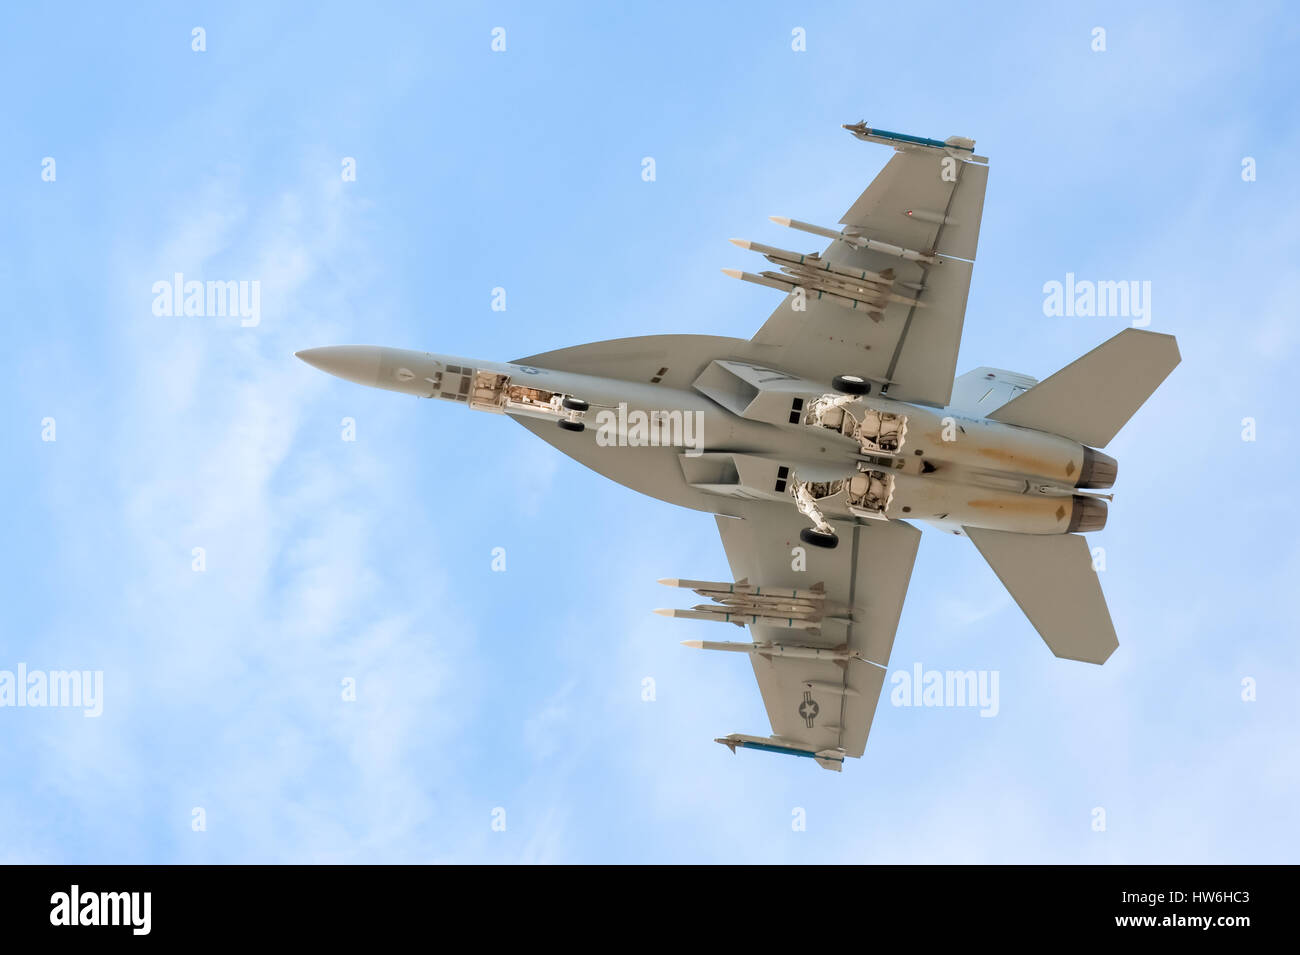 US Navy F-18 Super Hornet with full undercarriage extension at the Farnborough Airshow, UK Stock Photo